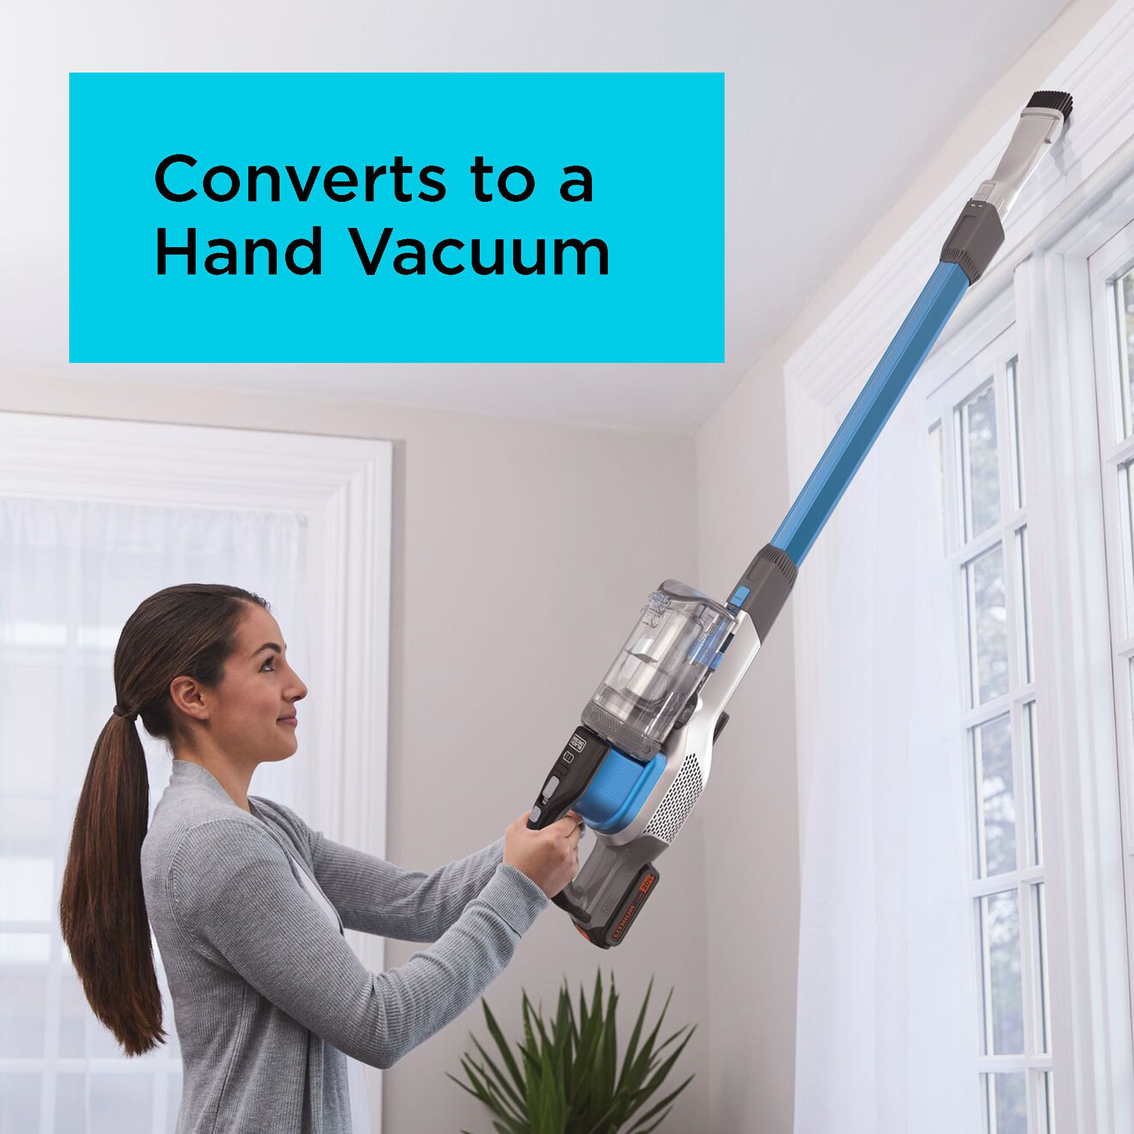 Black + Decker PowerSeries Extreme Cordless Stick Vacuum Cleaner - Image 4 of 7